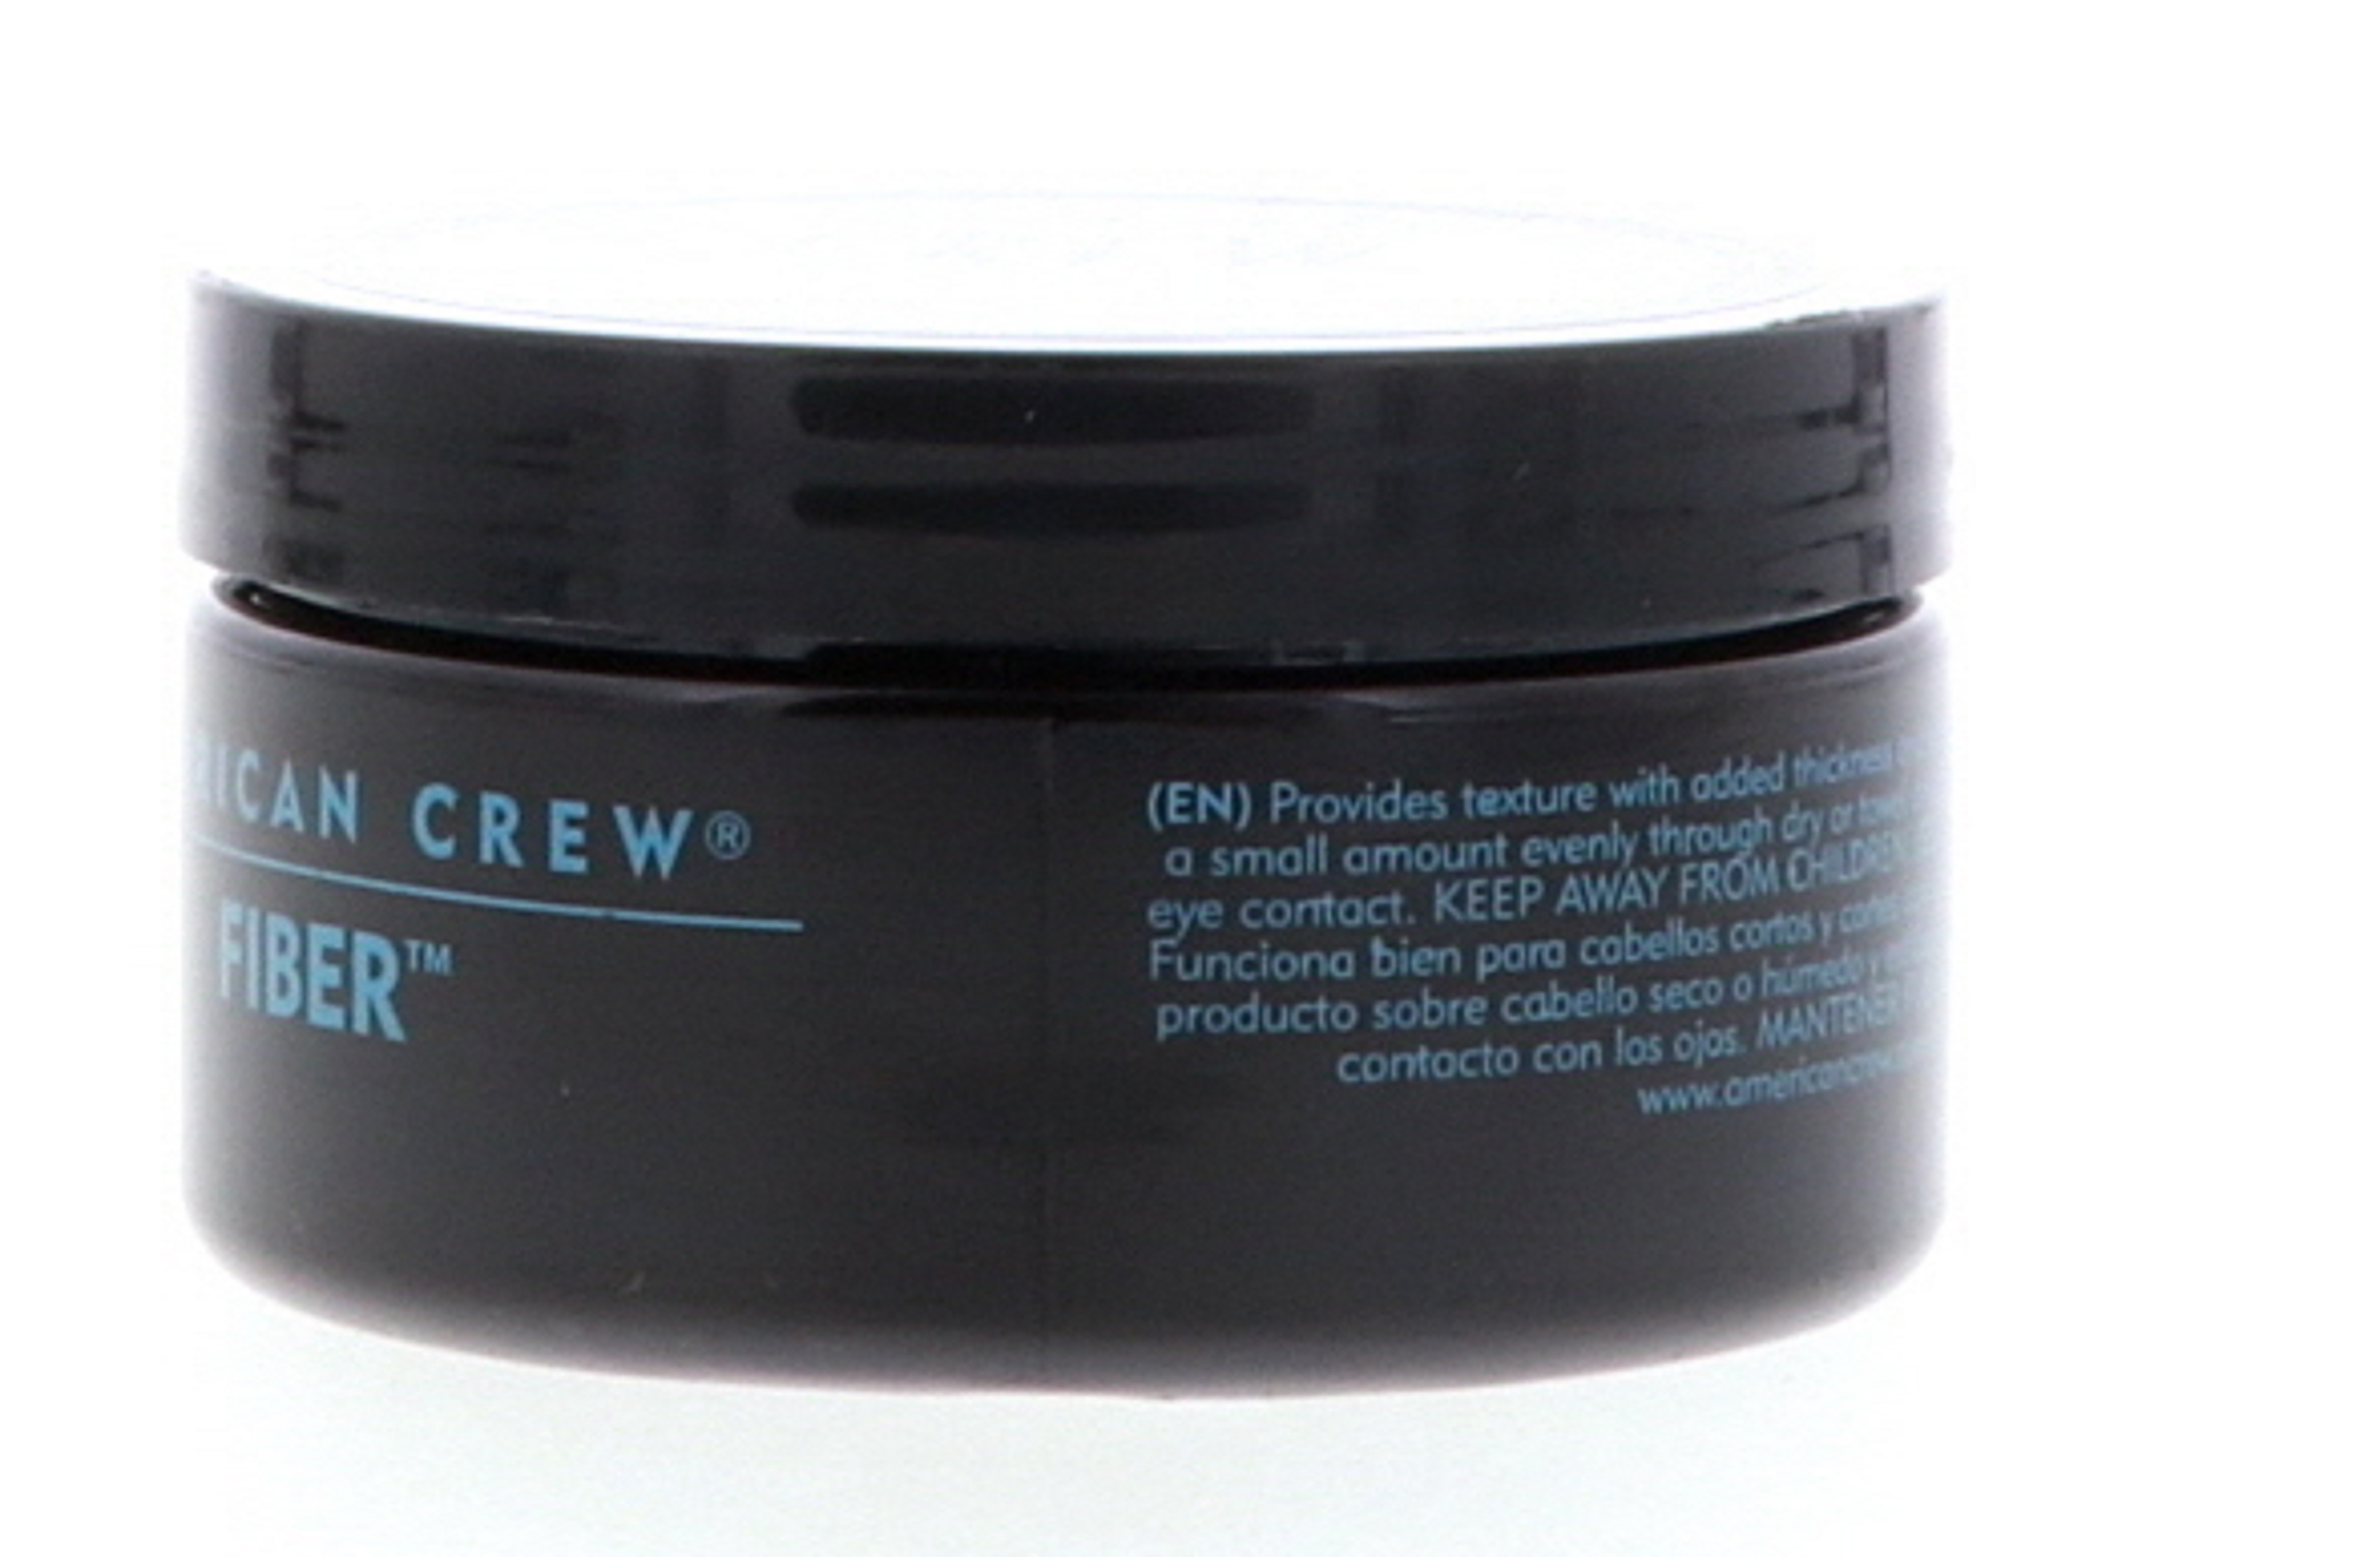 American Crew Fiber Pliable Molding Creme For Men 3 Ounces, PACK OF 3 - image 3 of 6